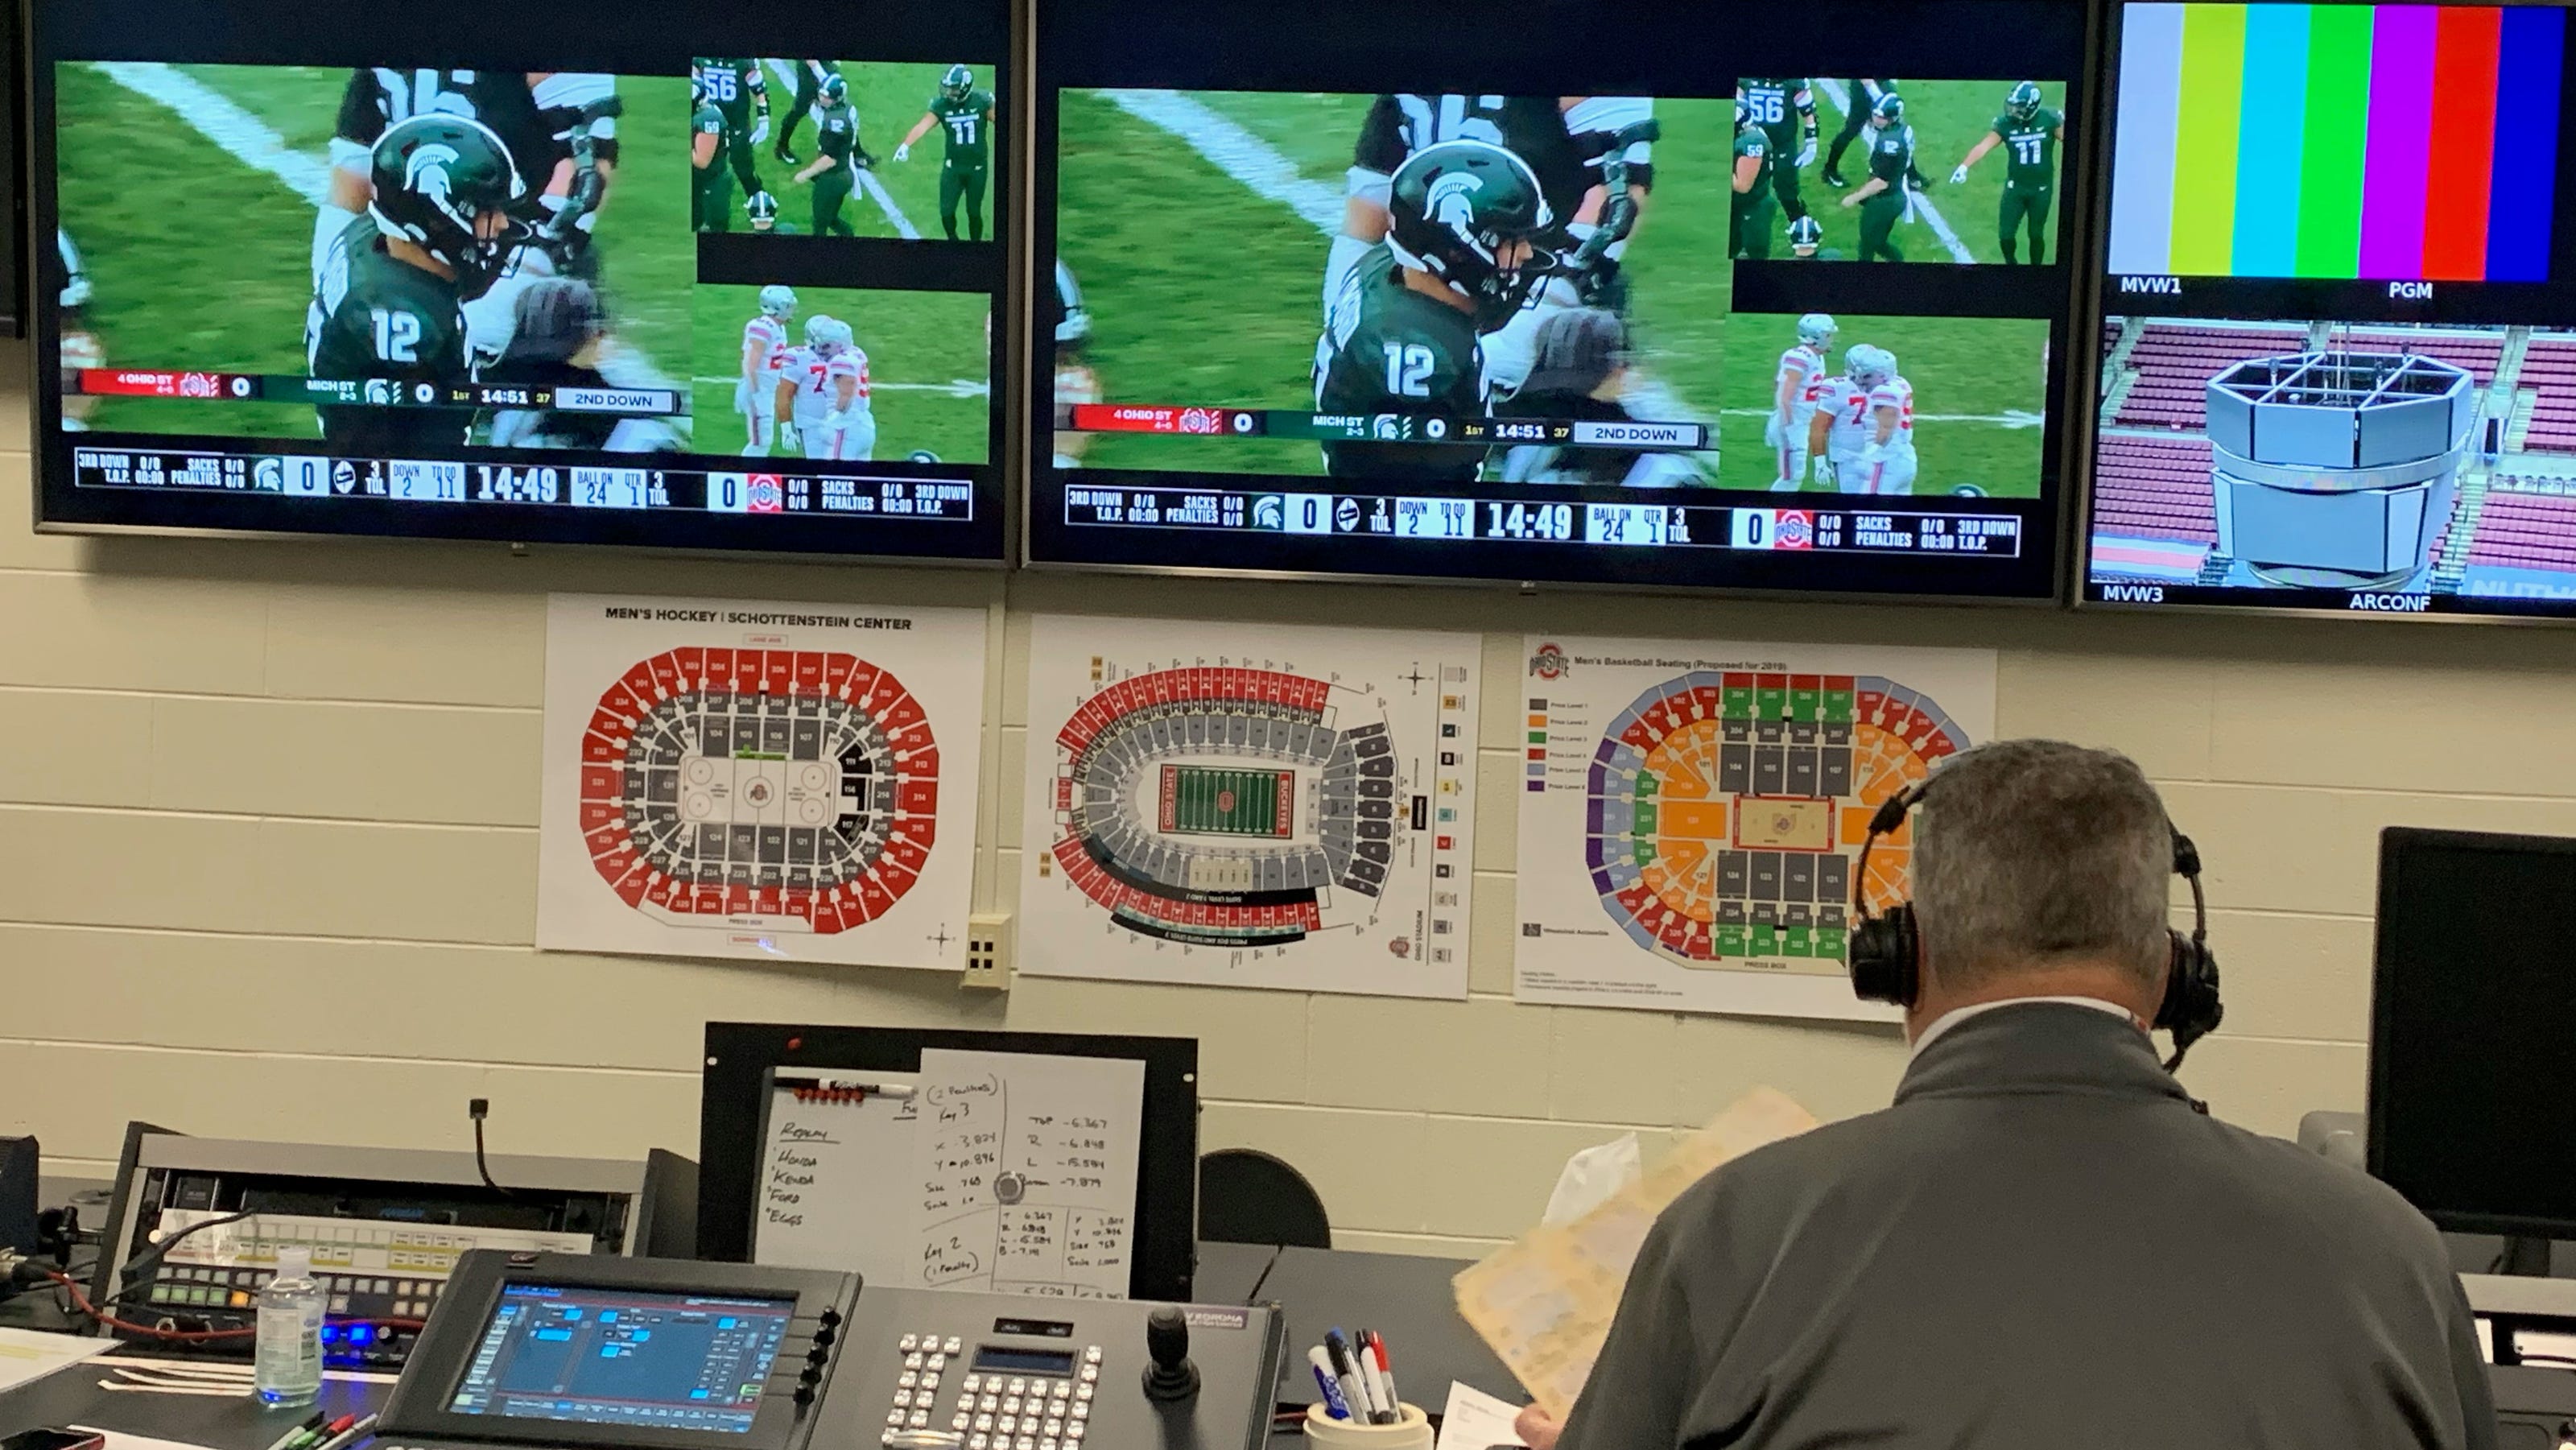 Ohio State football broadcasts go remote amid COVID-19 restrictions